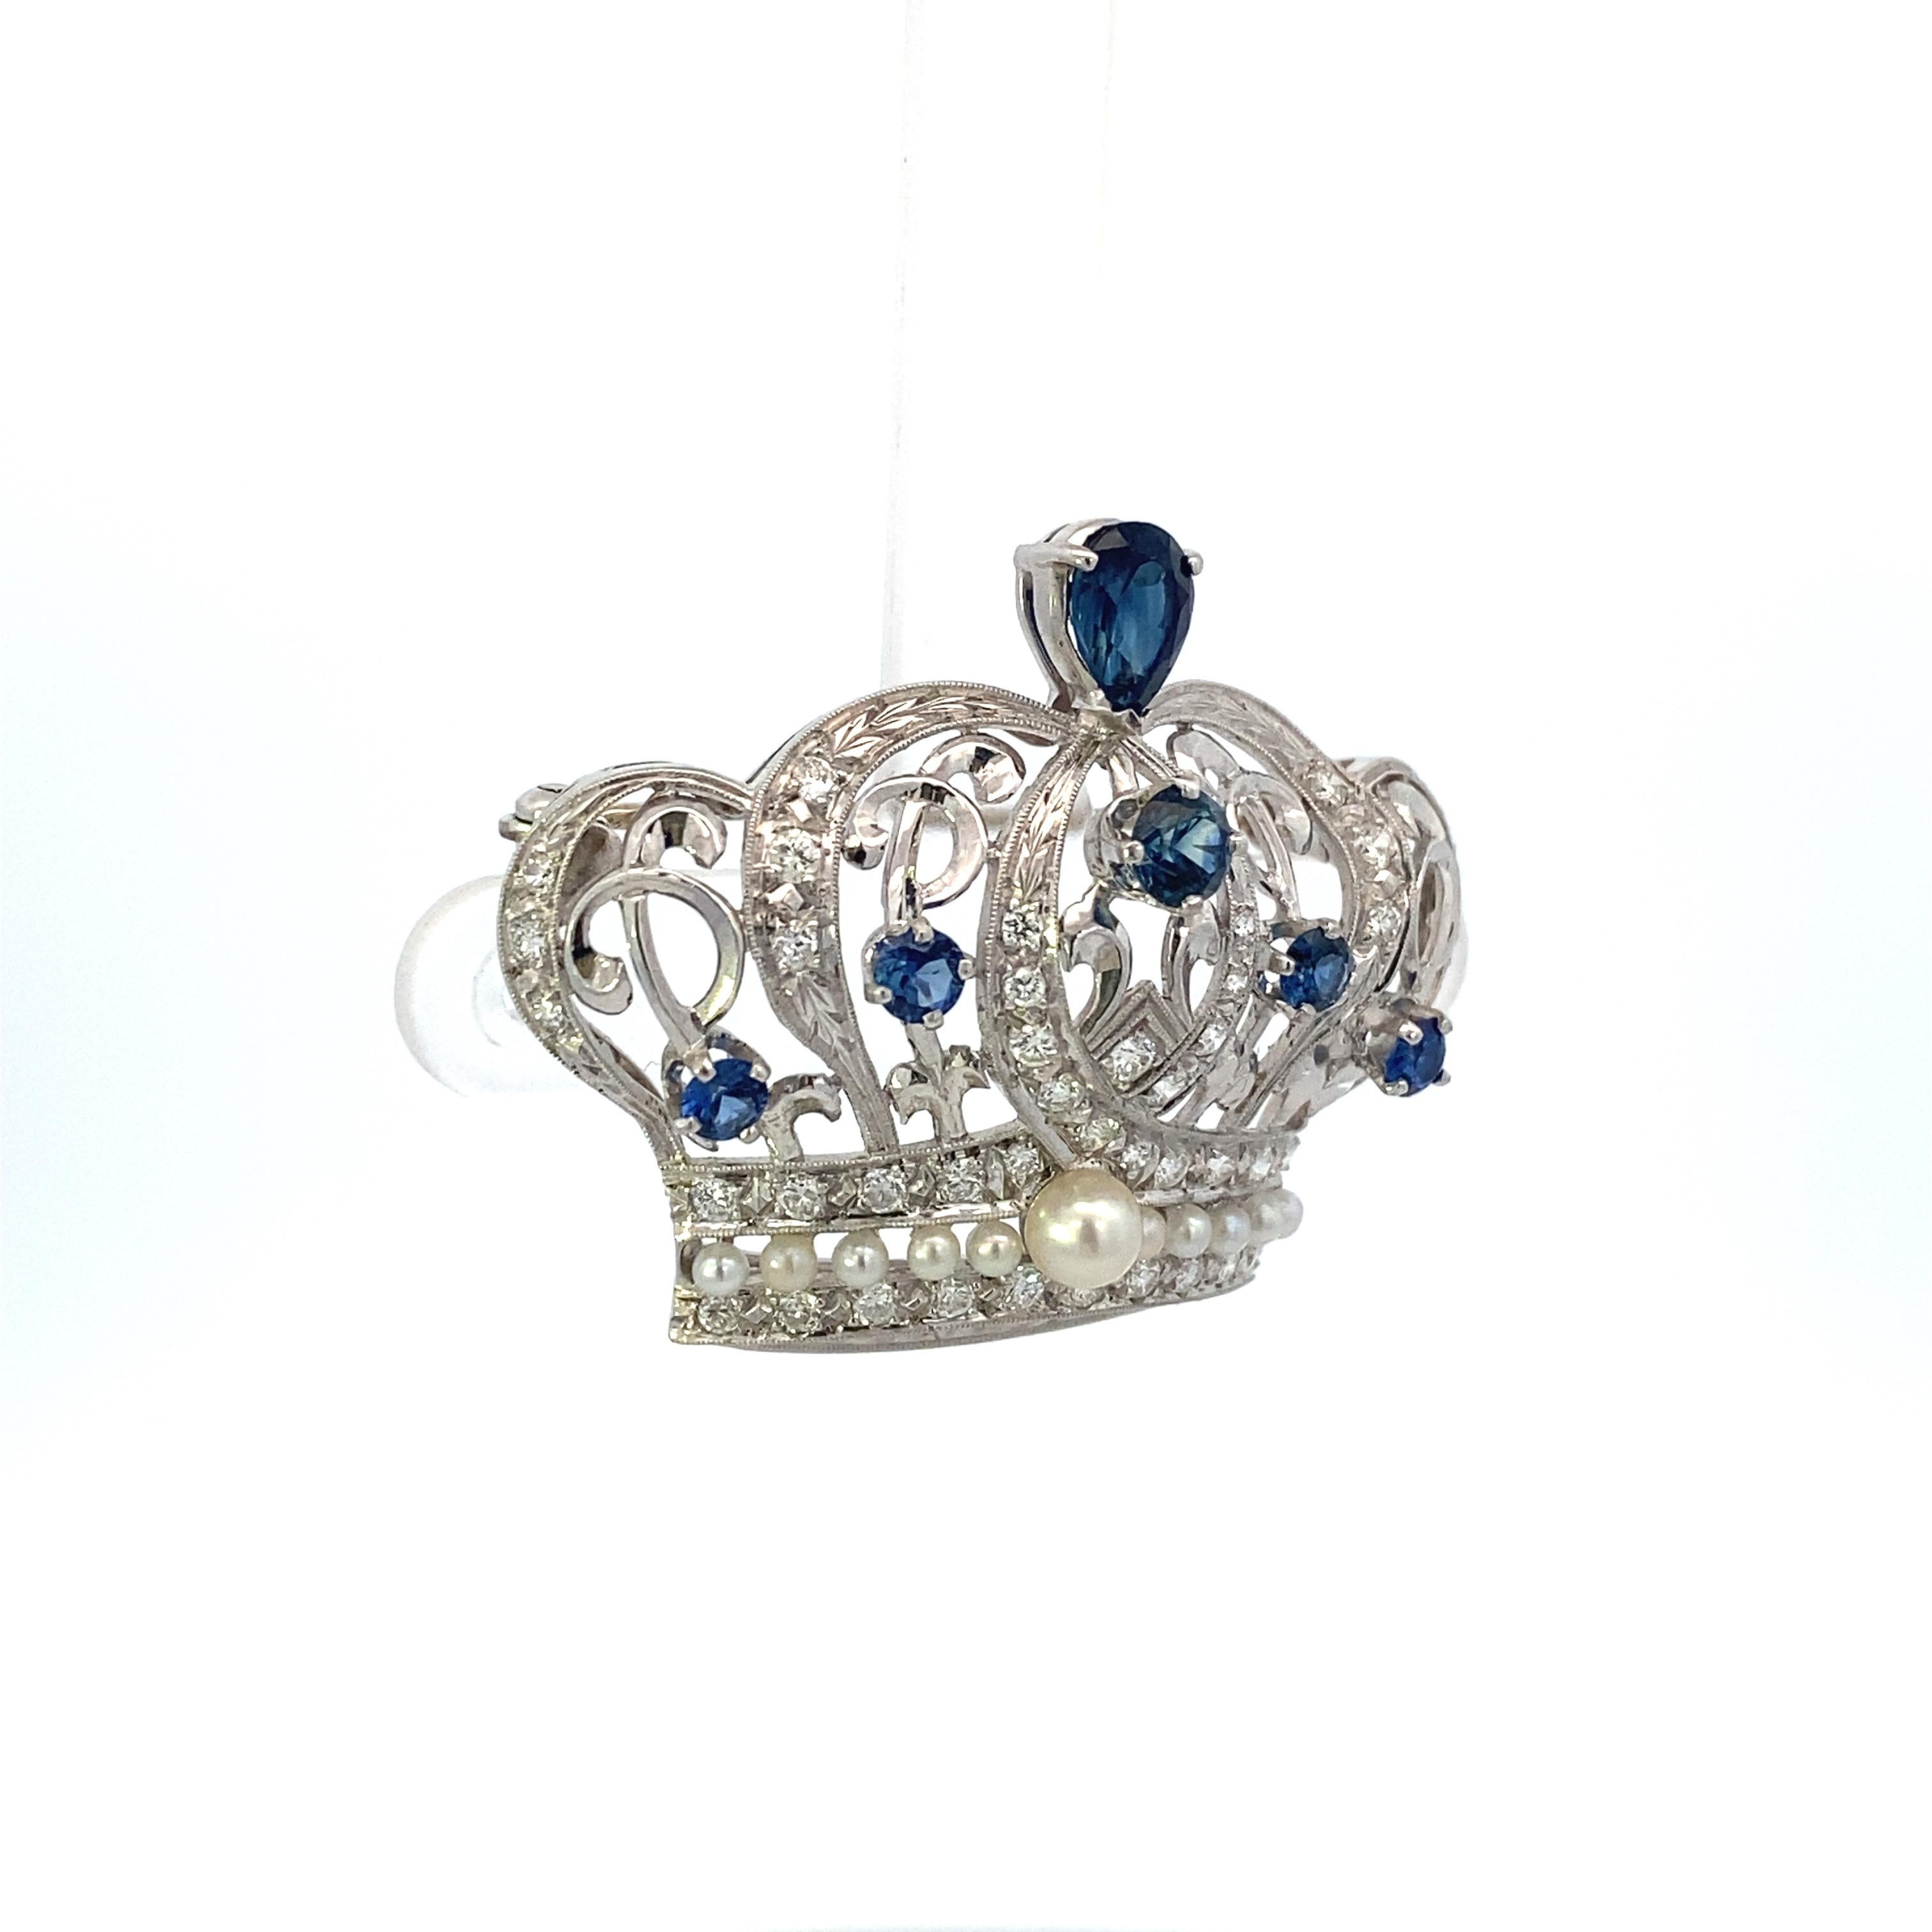 Edwardian-Styled Platinum Crown Brooch with Sapphires, Diamonds and Pearls 3